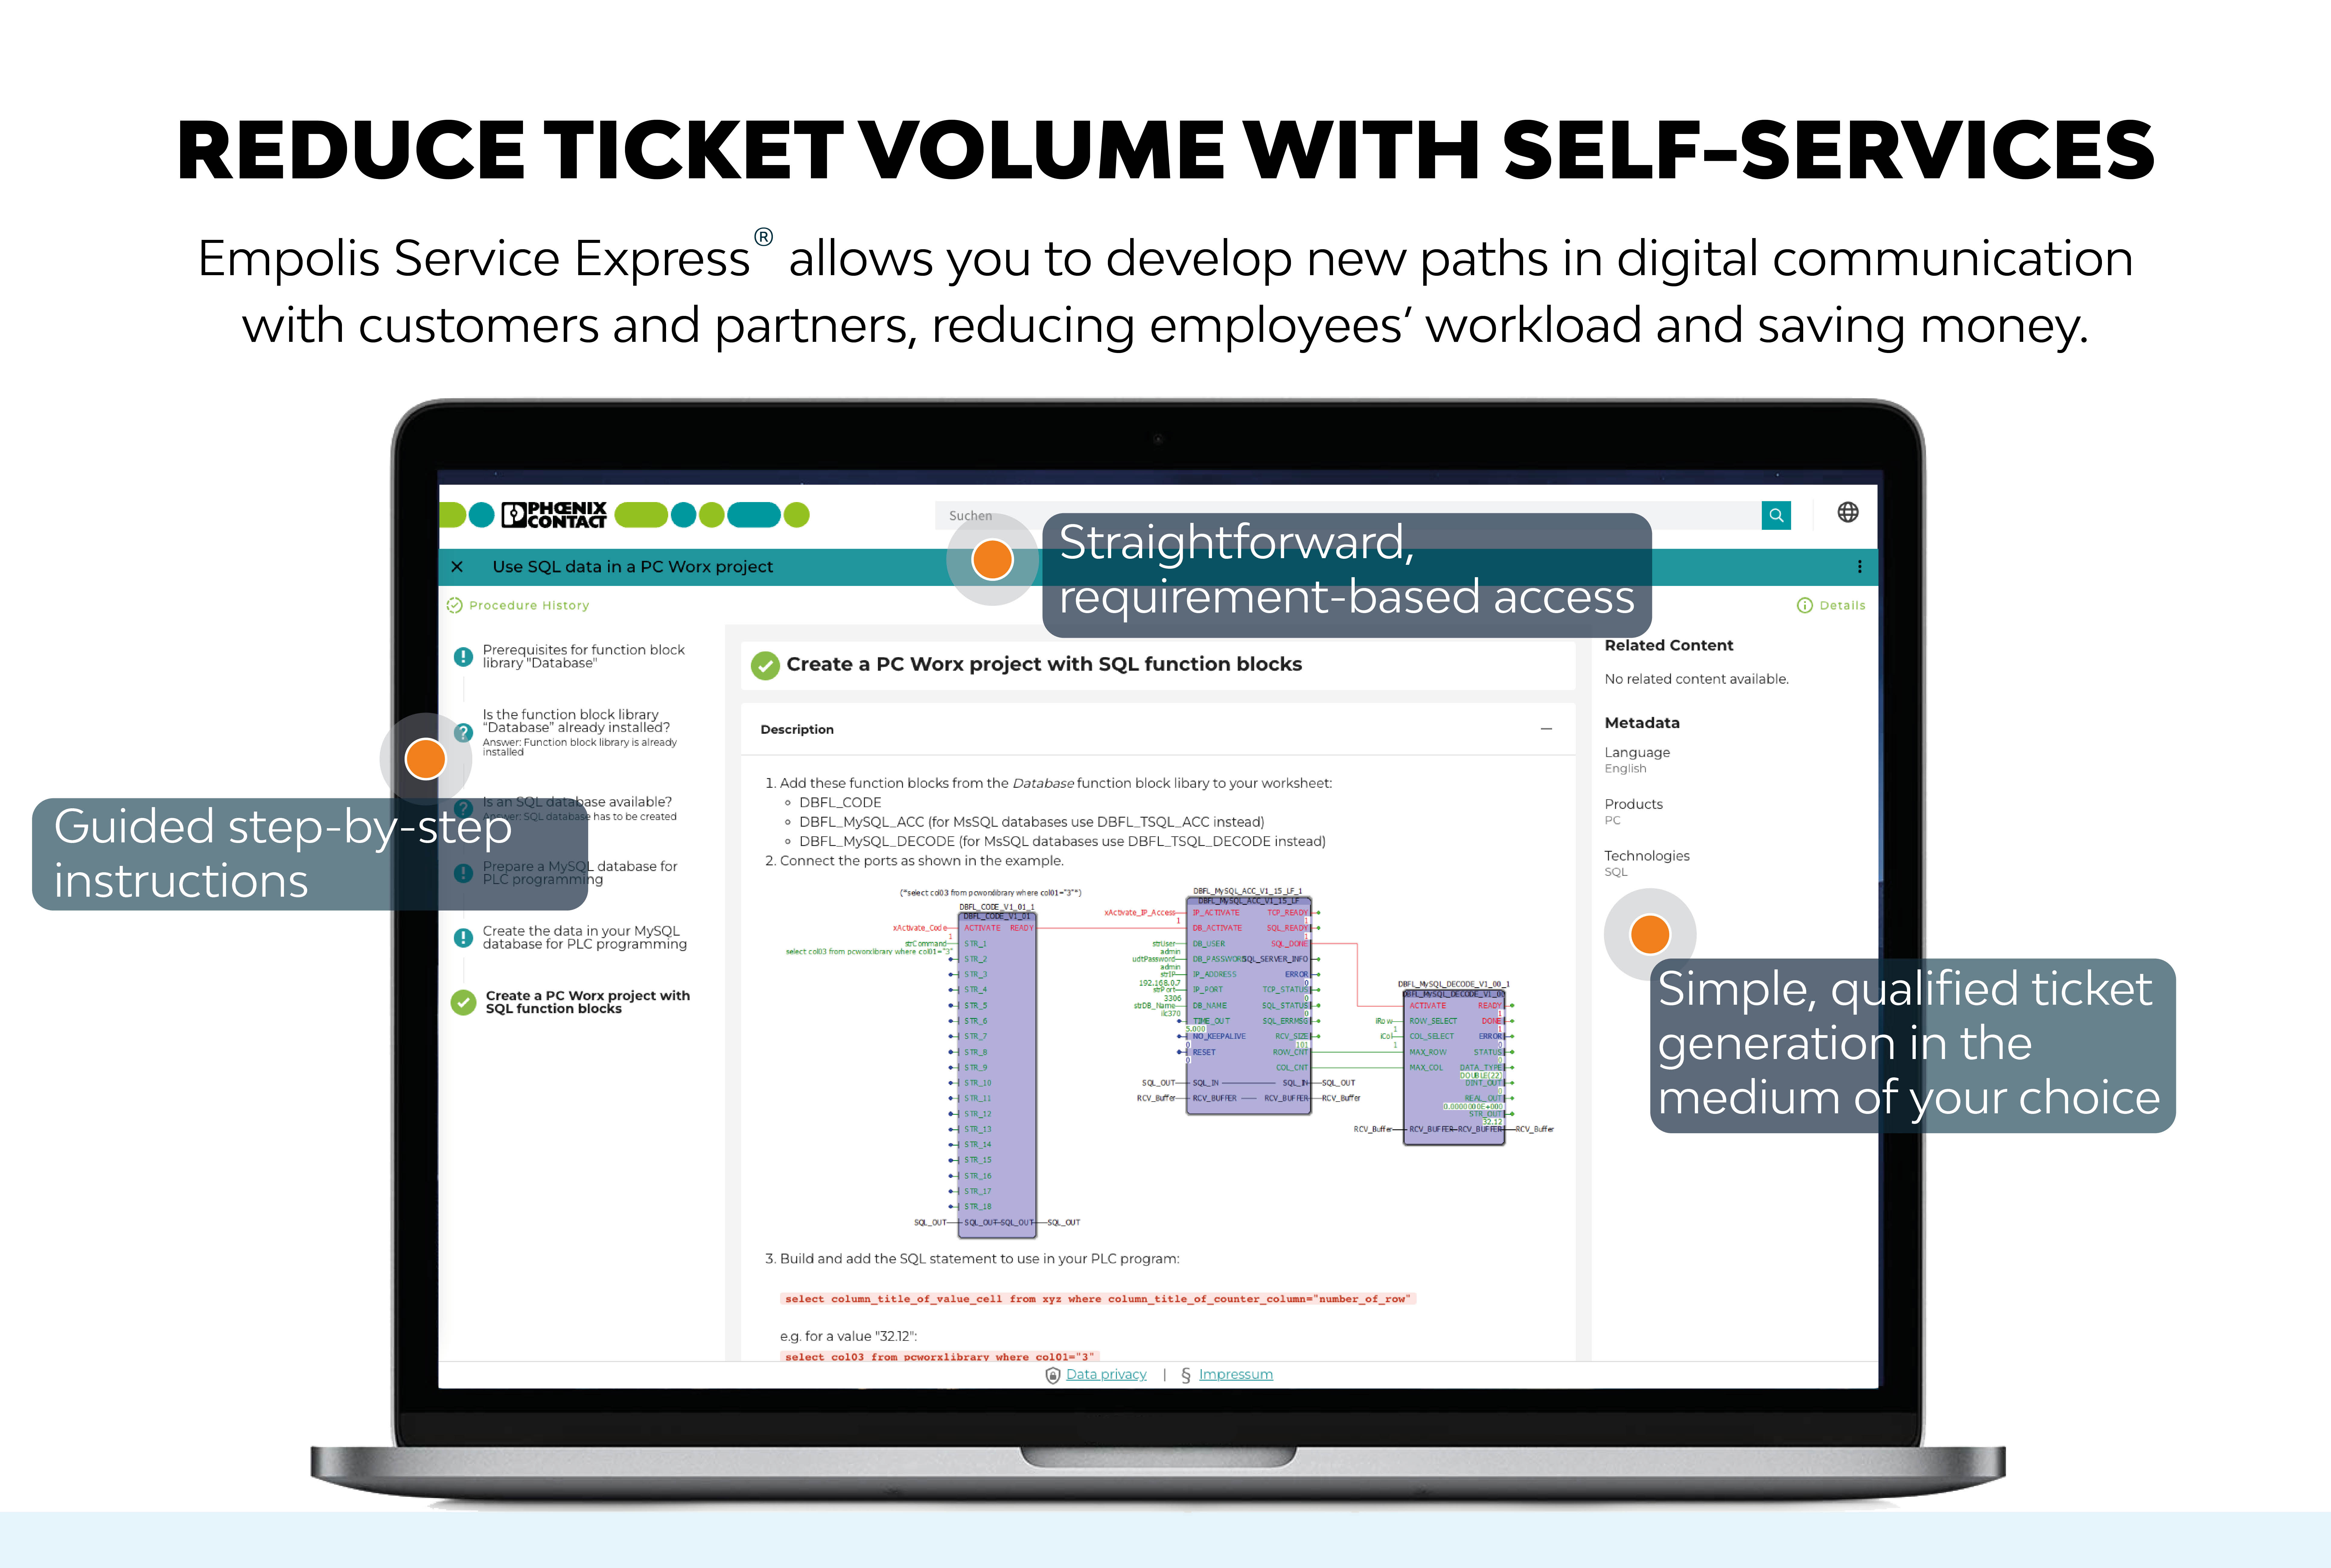 Reduced ticket volume with self-service